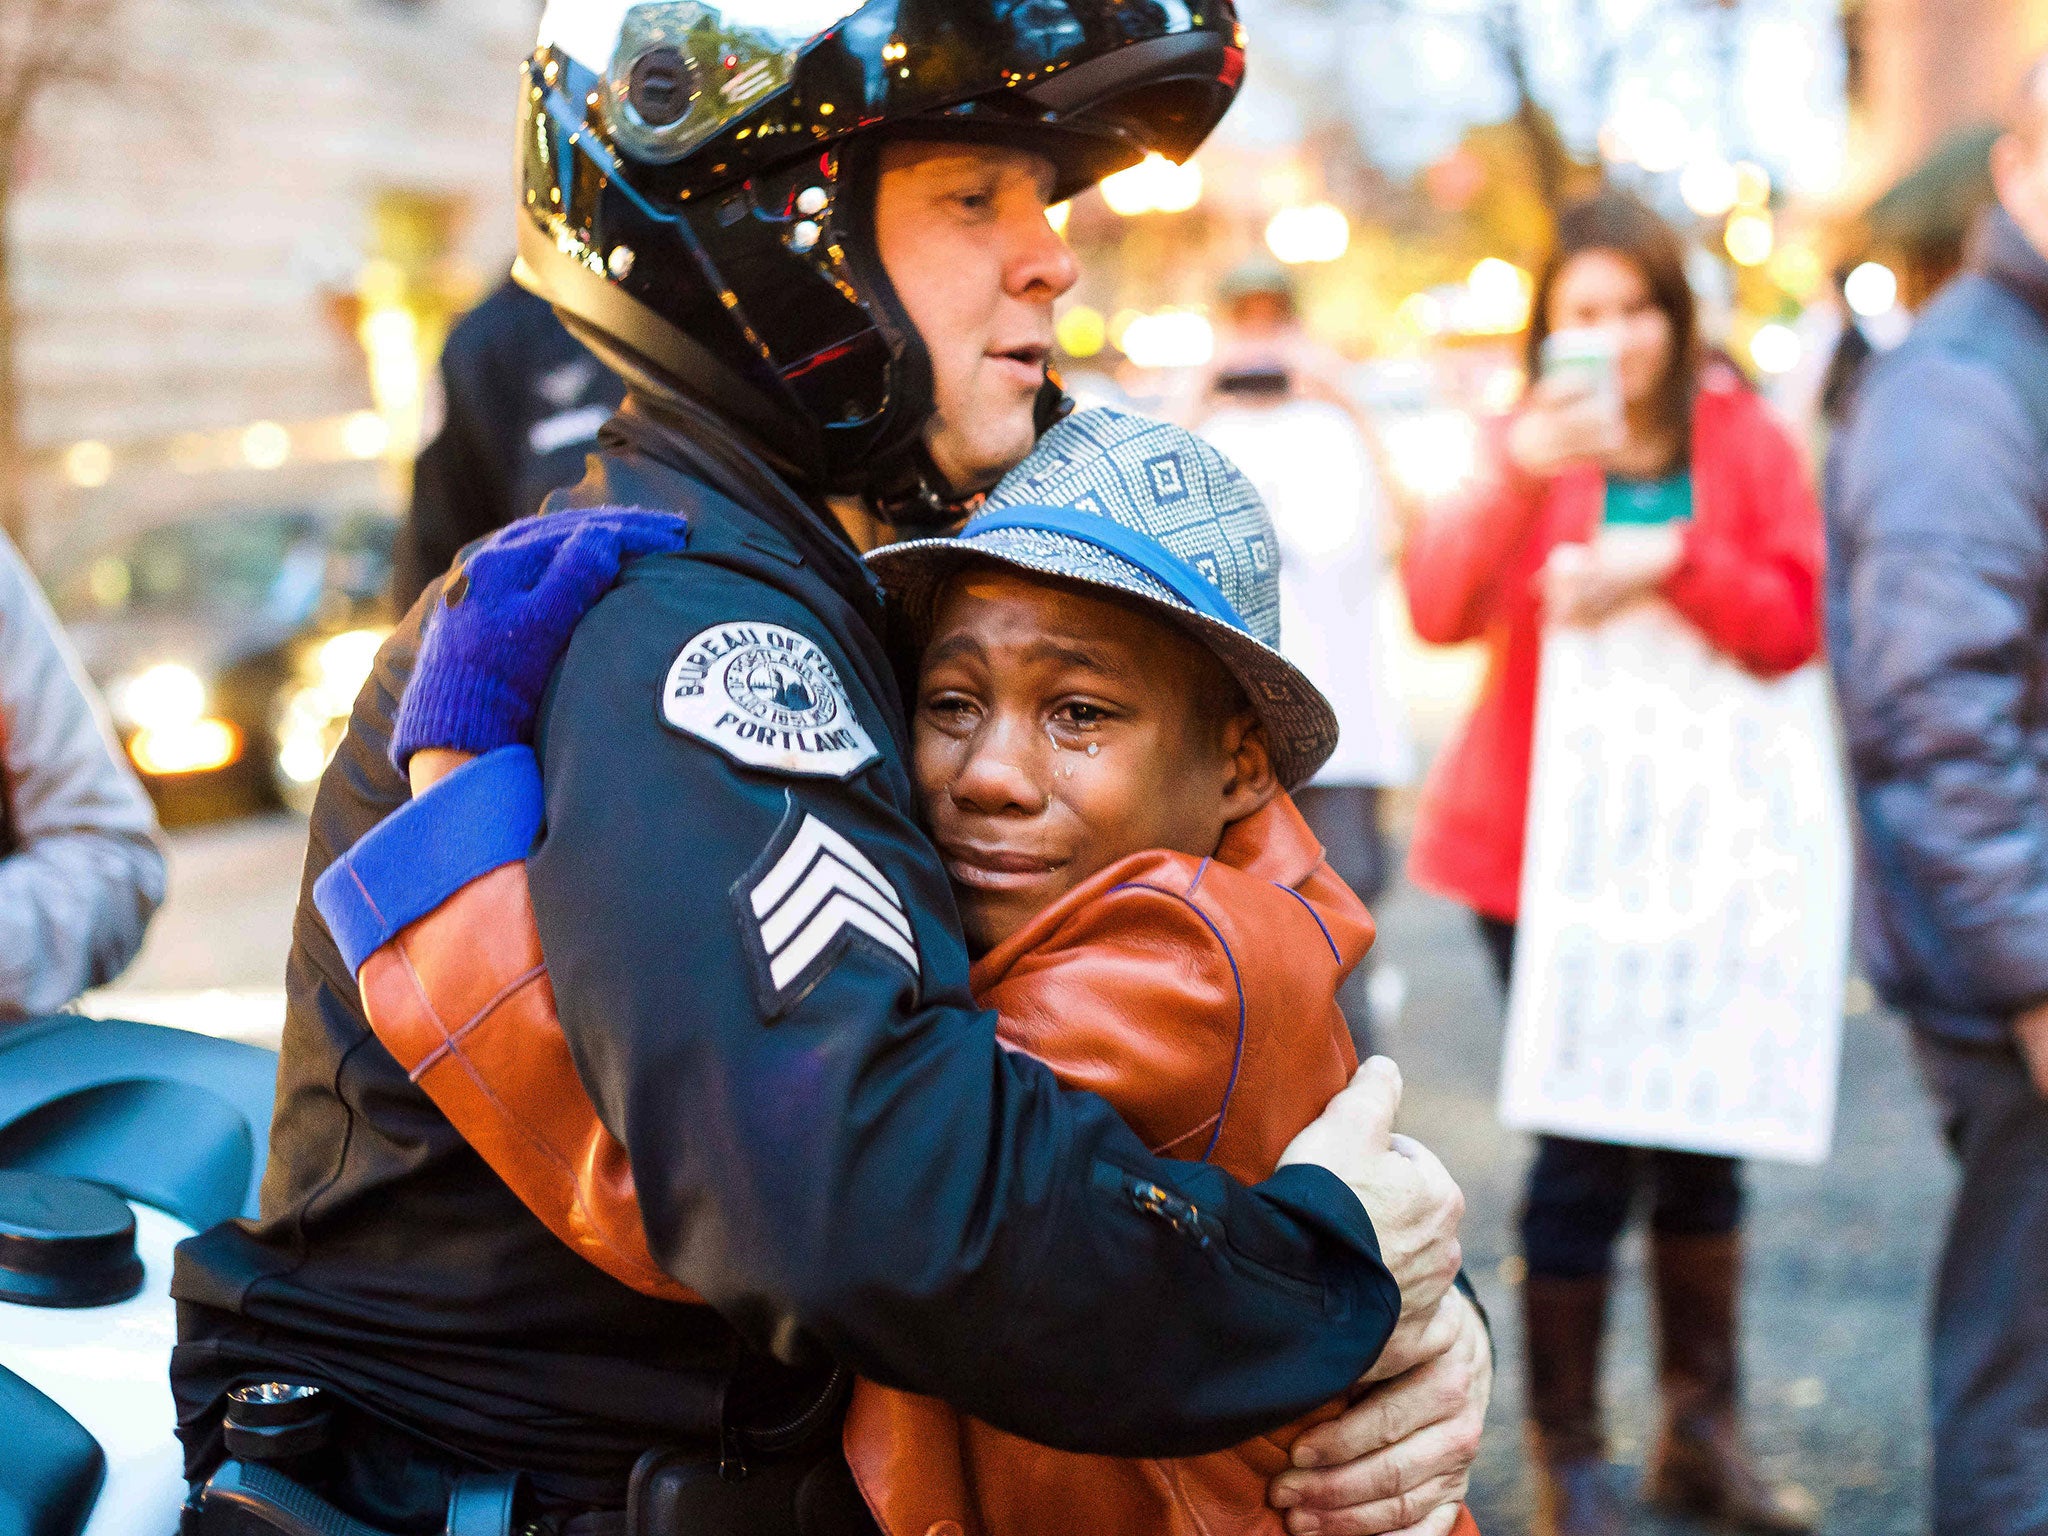 Portland police Sgt. Bret Barnum, left, and Devonte Hart, 12, hug at a rally in Portland, Ore., where people had gathered in support of the protests in Ferguson